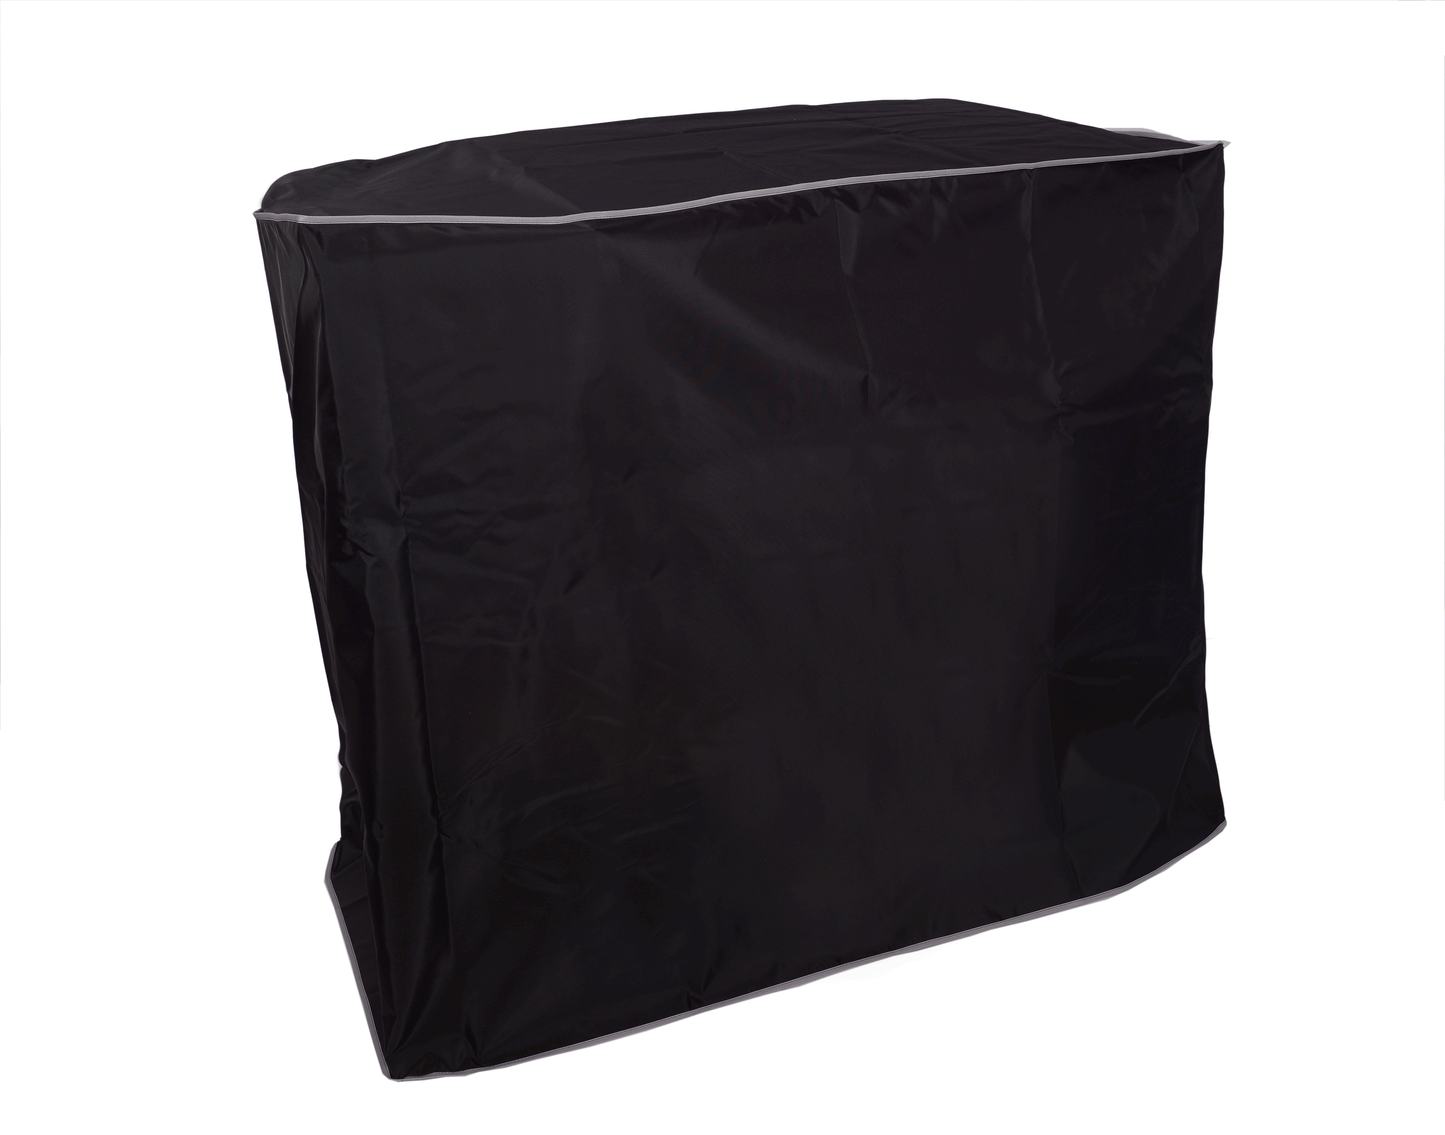 Perfect Dust Cover, Black Nylon Cover Compatible with GCC Jaguar V J5-132LX 52'' Vinyl Cutting Plotter, Anti-Static and Waterproof Dust Cover Dimensions 69.8''W x 25.6''D x 43.7''H by The Perfect Dust Cover LLC